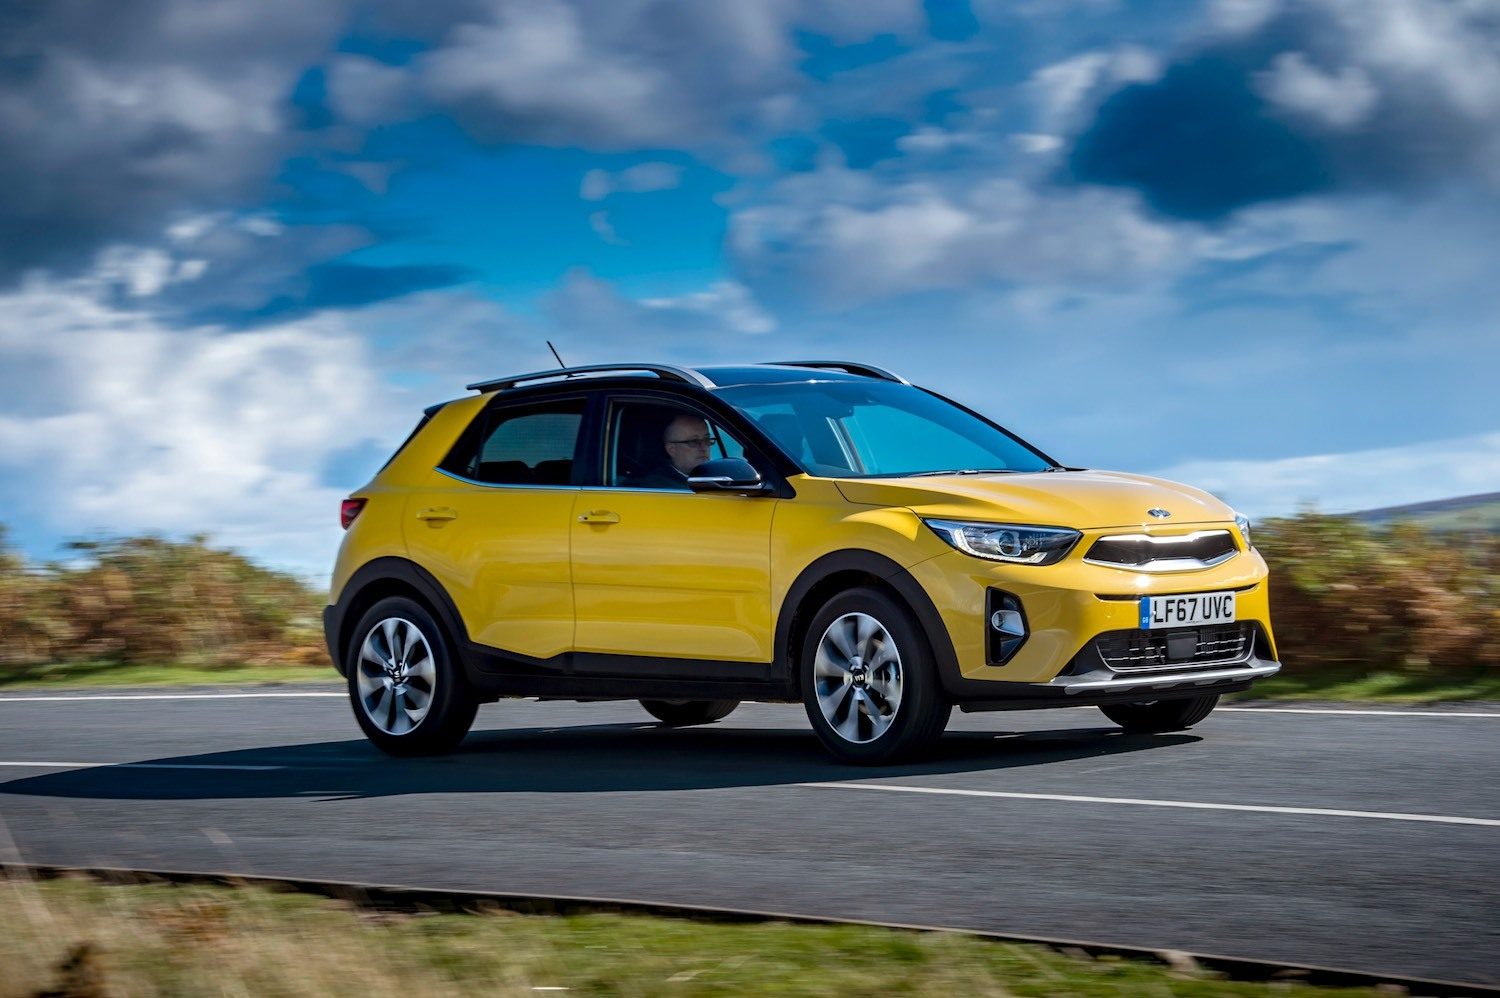 All New Kia Stonic reviewed by Tom Scanlan for Drive 2